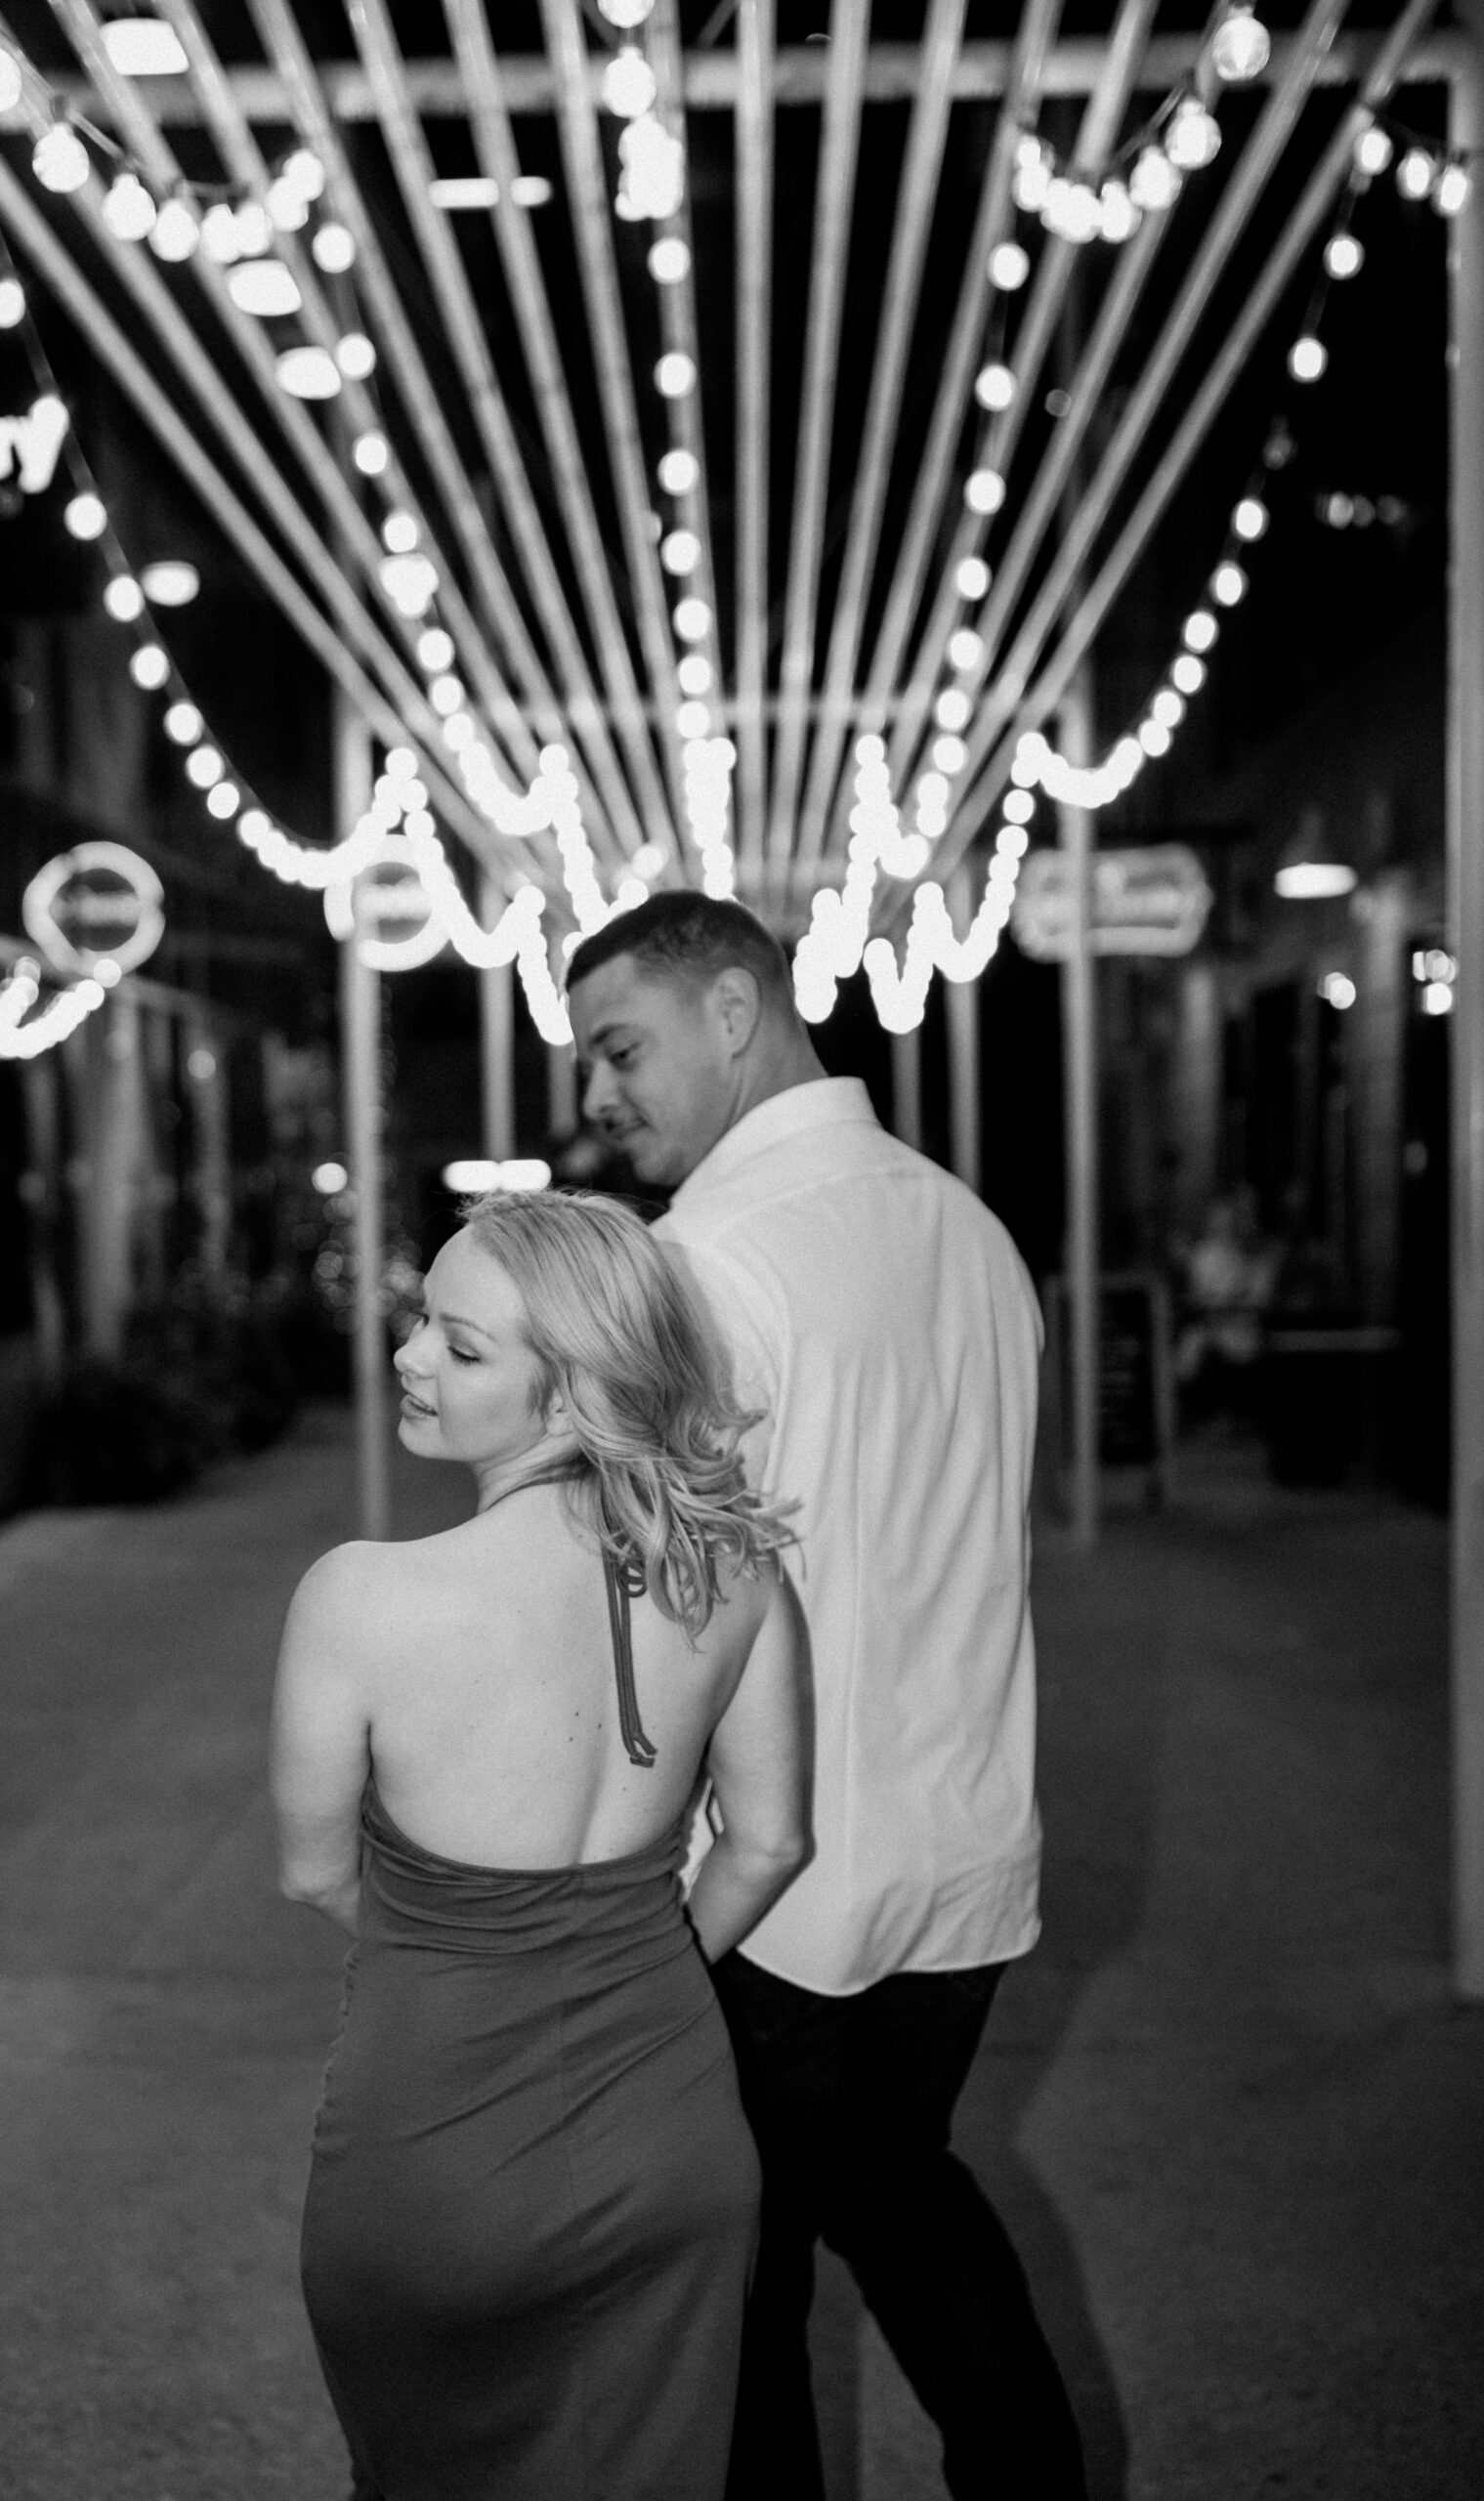 Downtown City Lights Couples Flash Photos on South Congress Avenue in Austin Texas. 